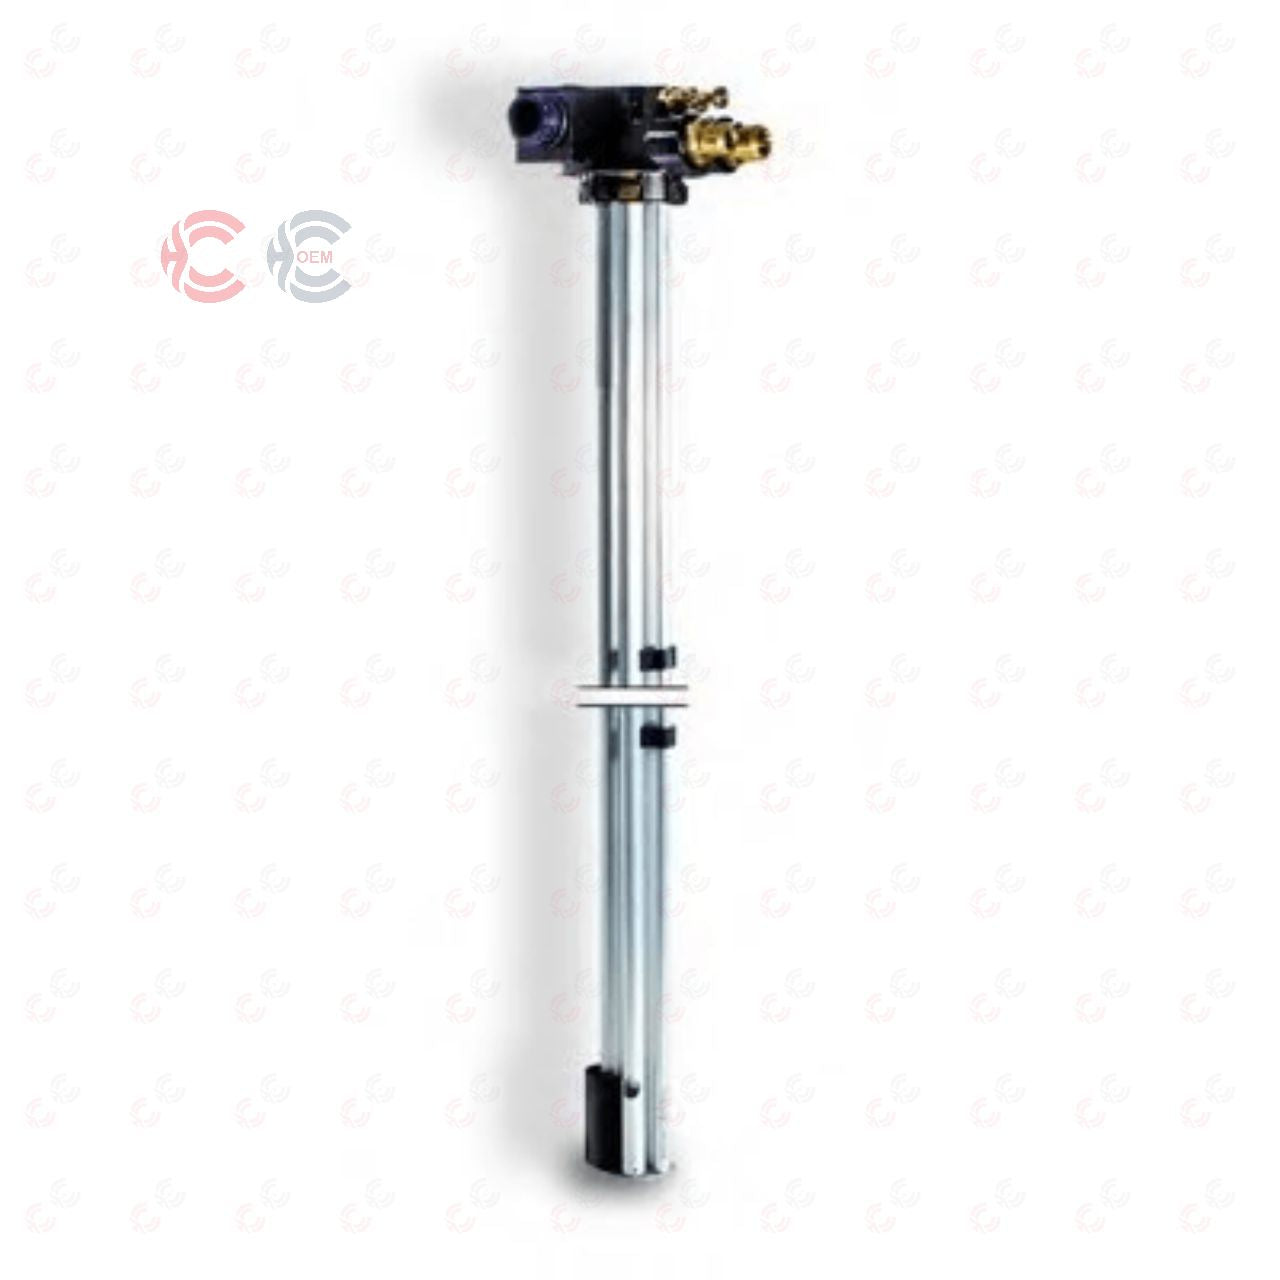 OEM: 20428462Material: ABS metalColor: Black GoldenOrigin: Made in ChinaWeight: 1000gPacking List: 1* Fuel Level Sensor More ServiceWe can provide OEM Manufacturing serviceWe can Be your one-step solution for Auto PartsWe can provide technical scheme for you Feel Free to Contact Us, we will get back to you as soon as possible.